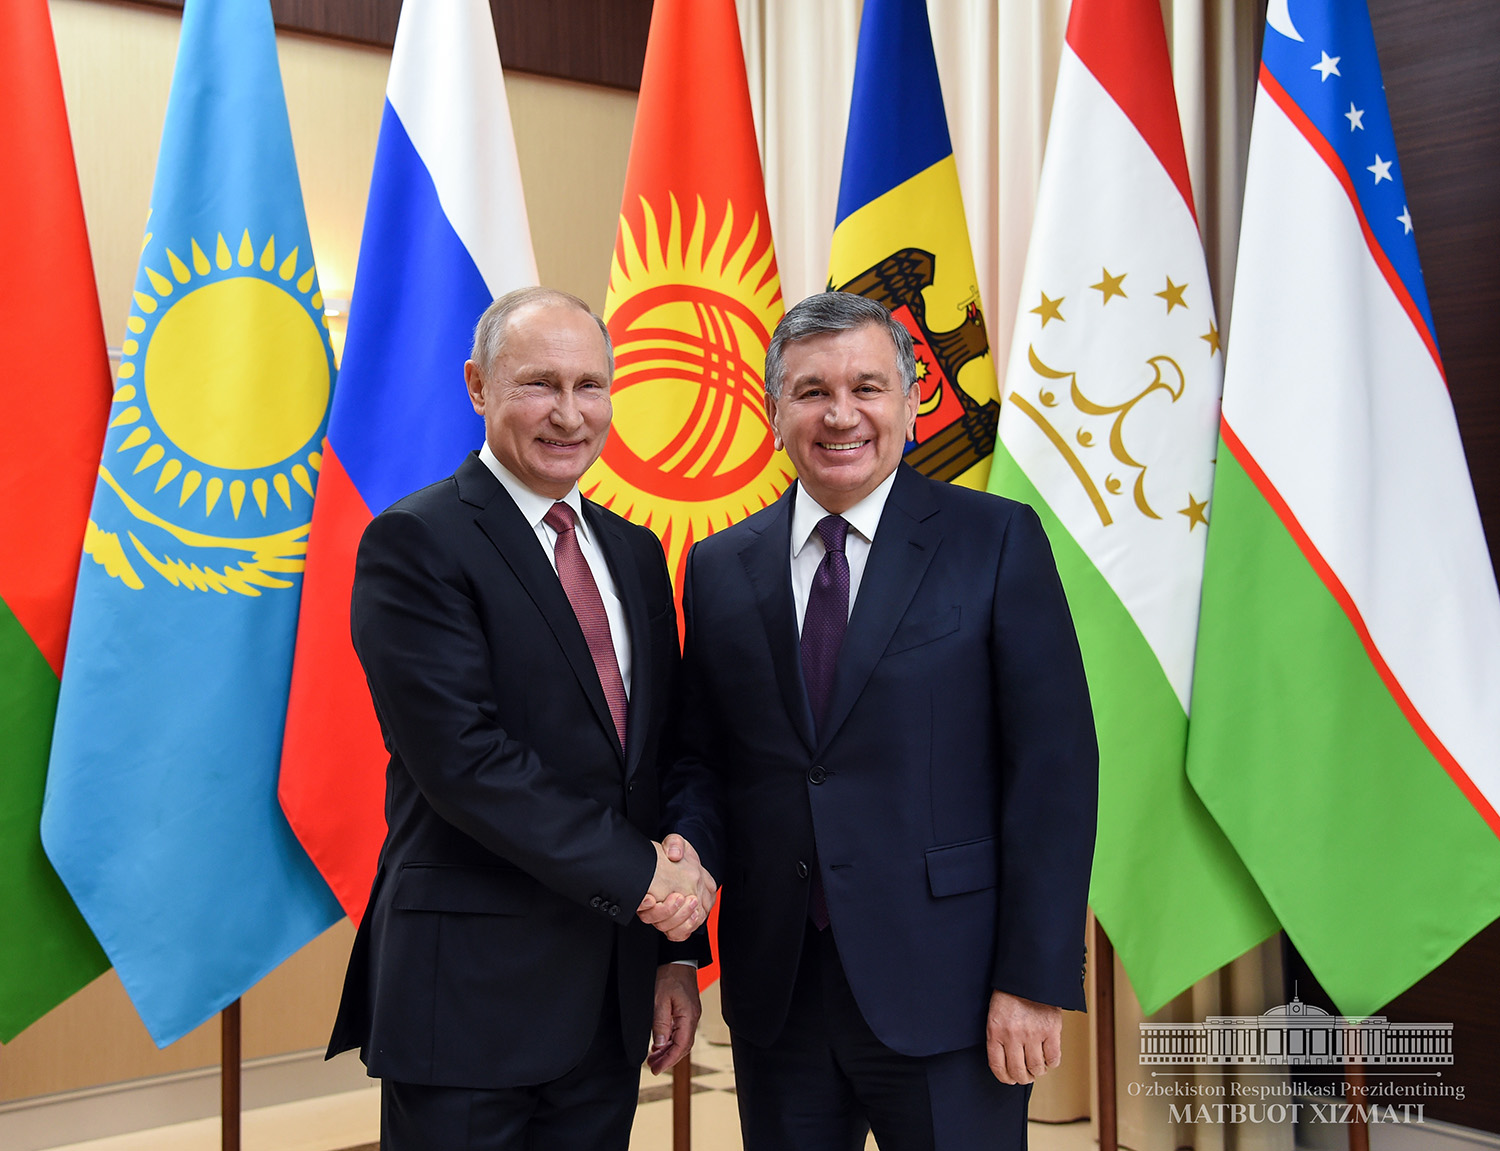 Informal meeting of the CIS Heads of States